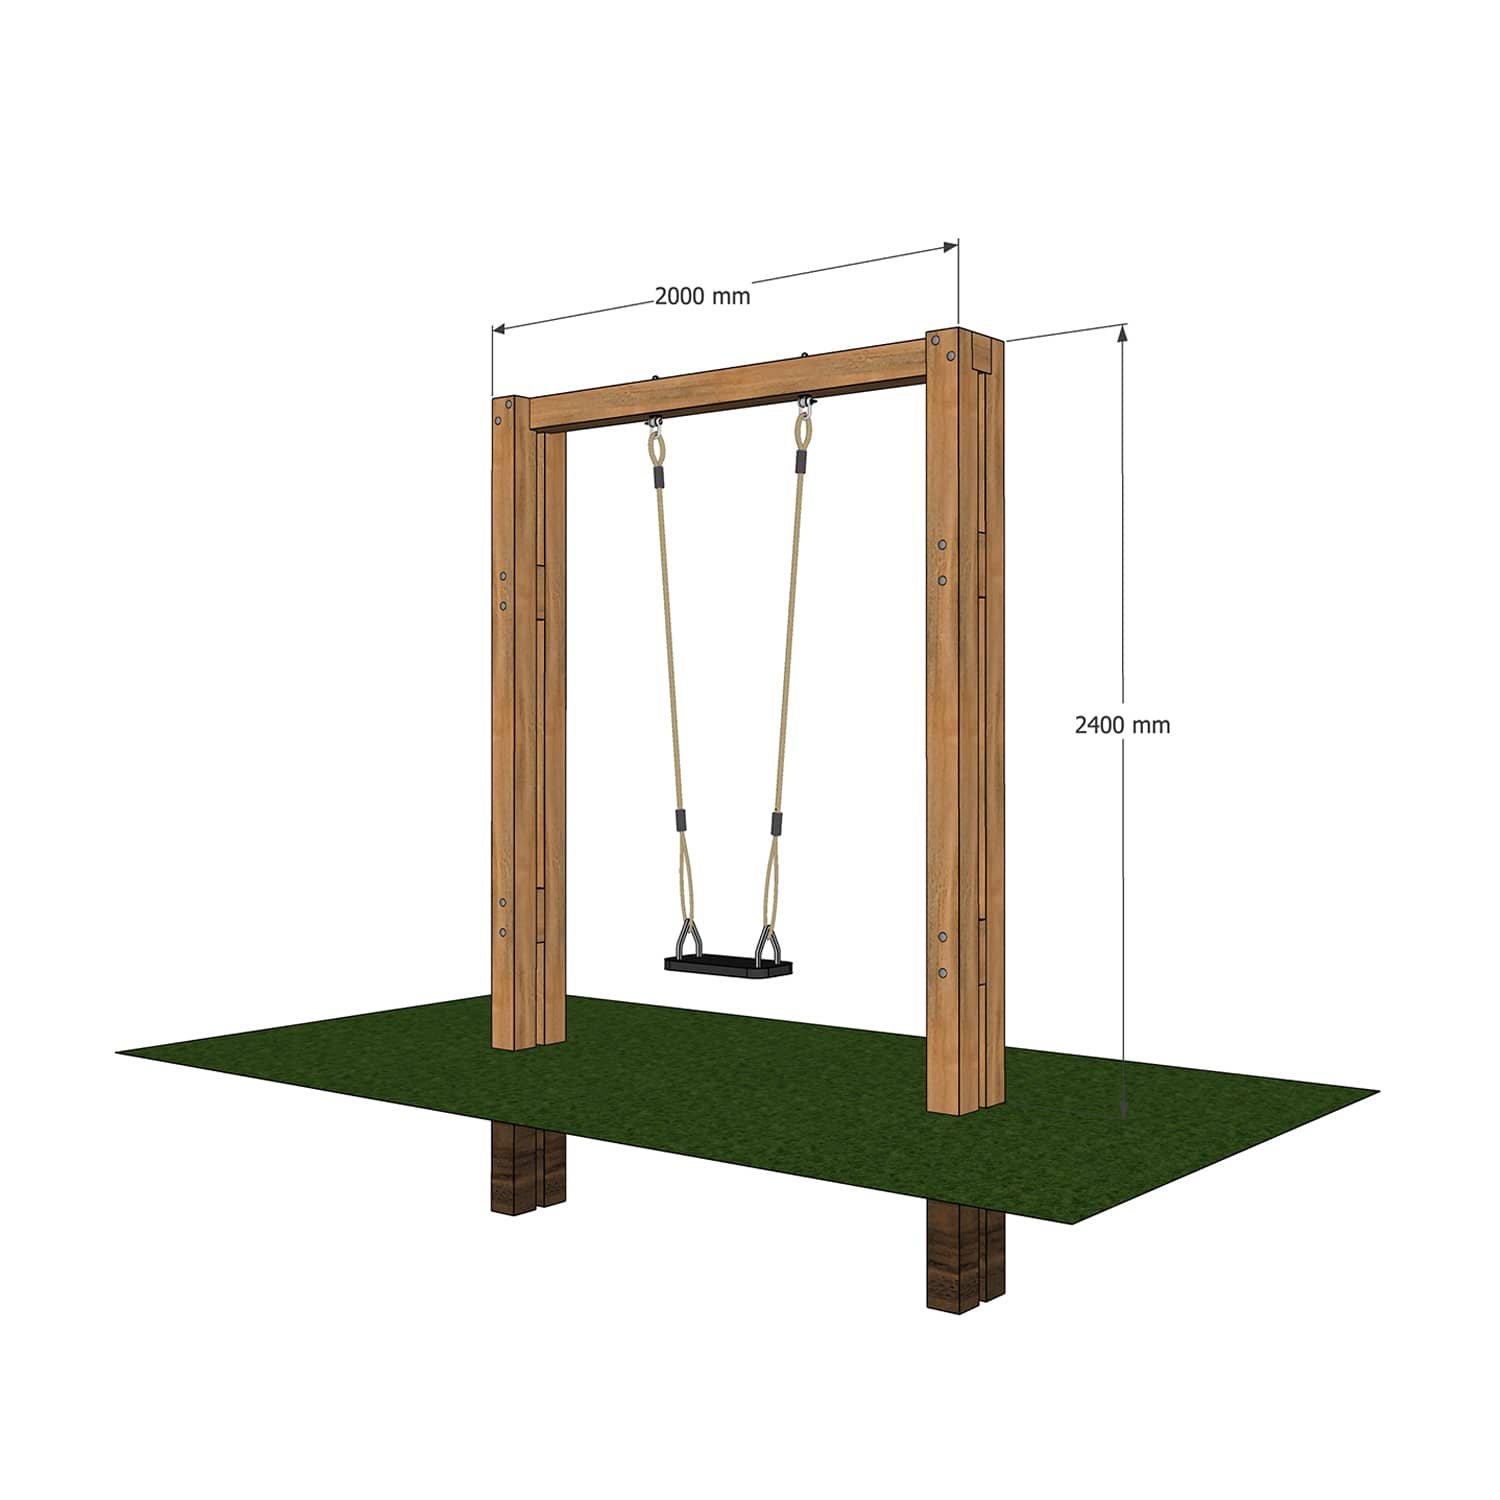 Timber swing set for kids with 1 solid seat.